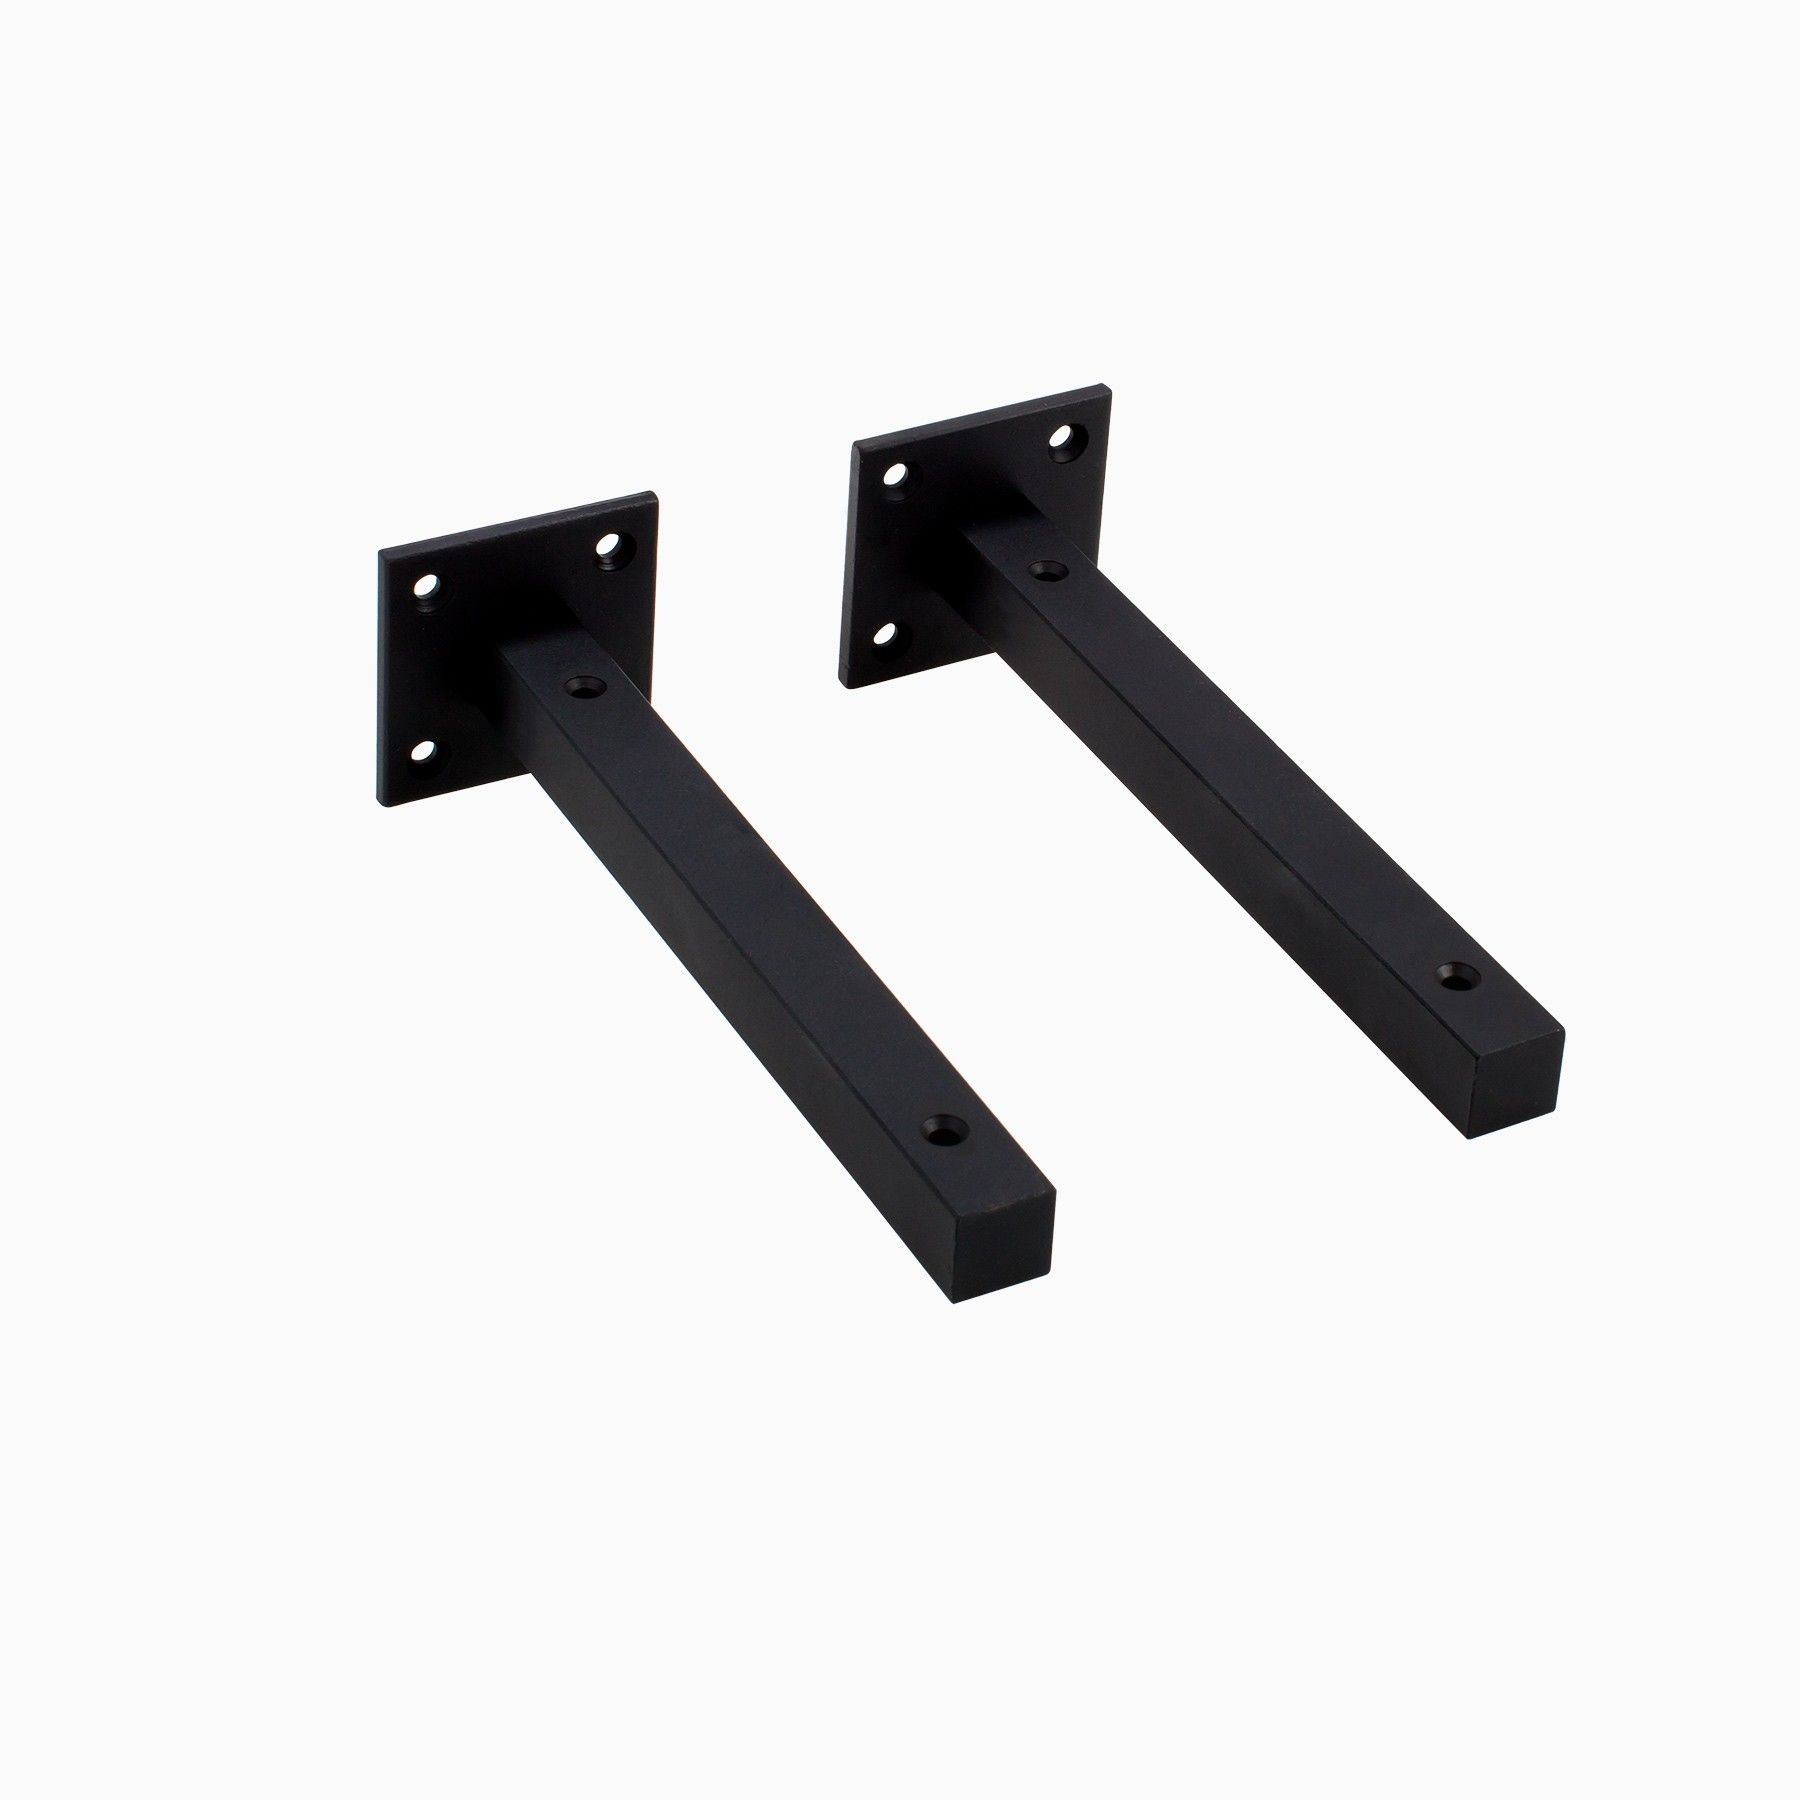 alcott shelf bracket set matte black remodel ikea floating wall mount mounted coat hooks with and baskets elbow large shoe storage mounting for equipment small book rack designs